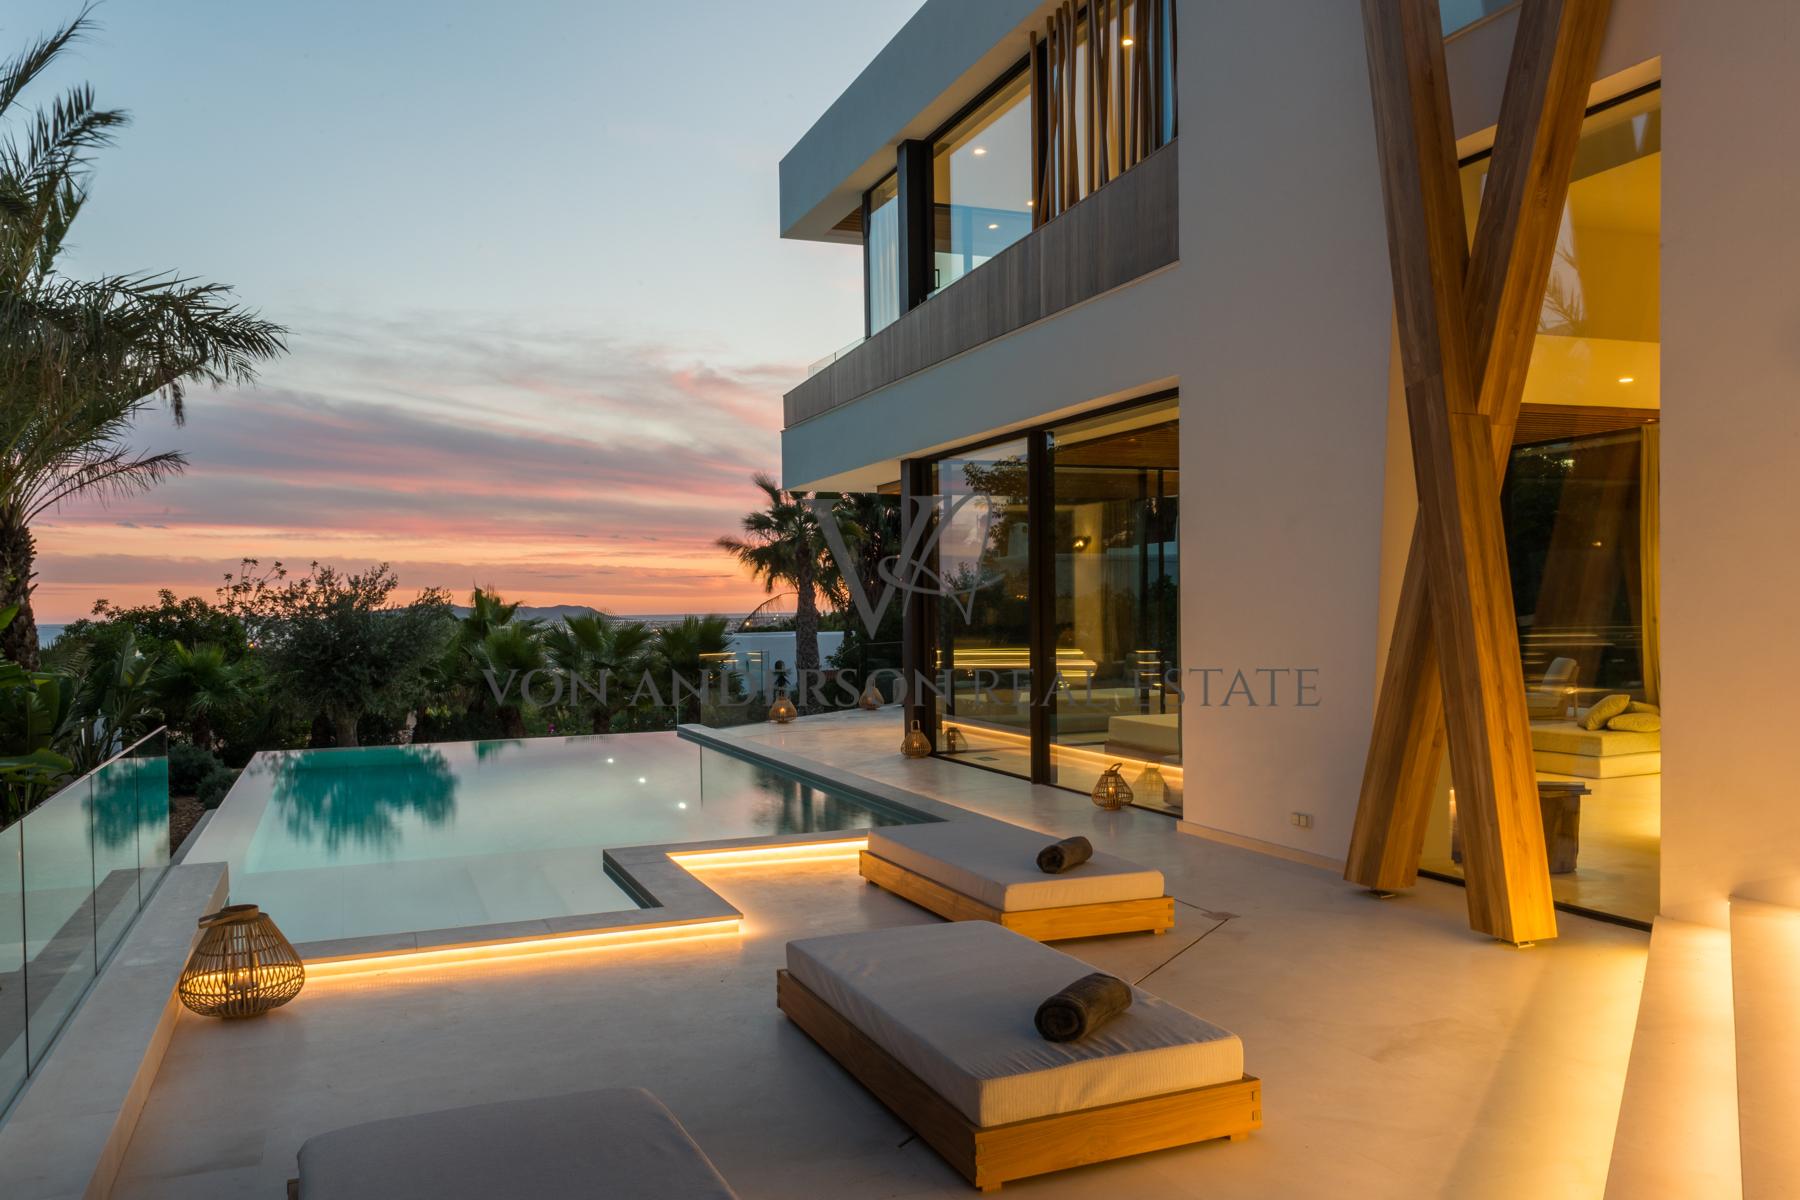 Stunning Modern Villa Offering Panoramic Sea Views Including Formentera, ref. VA1039, for sale in Ibiza by Von Anderson Real Estate